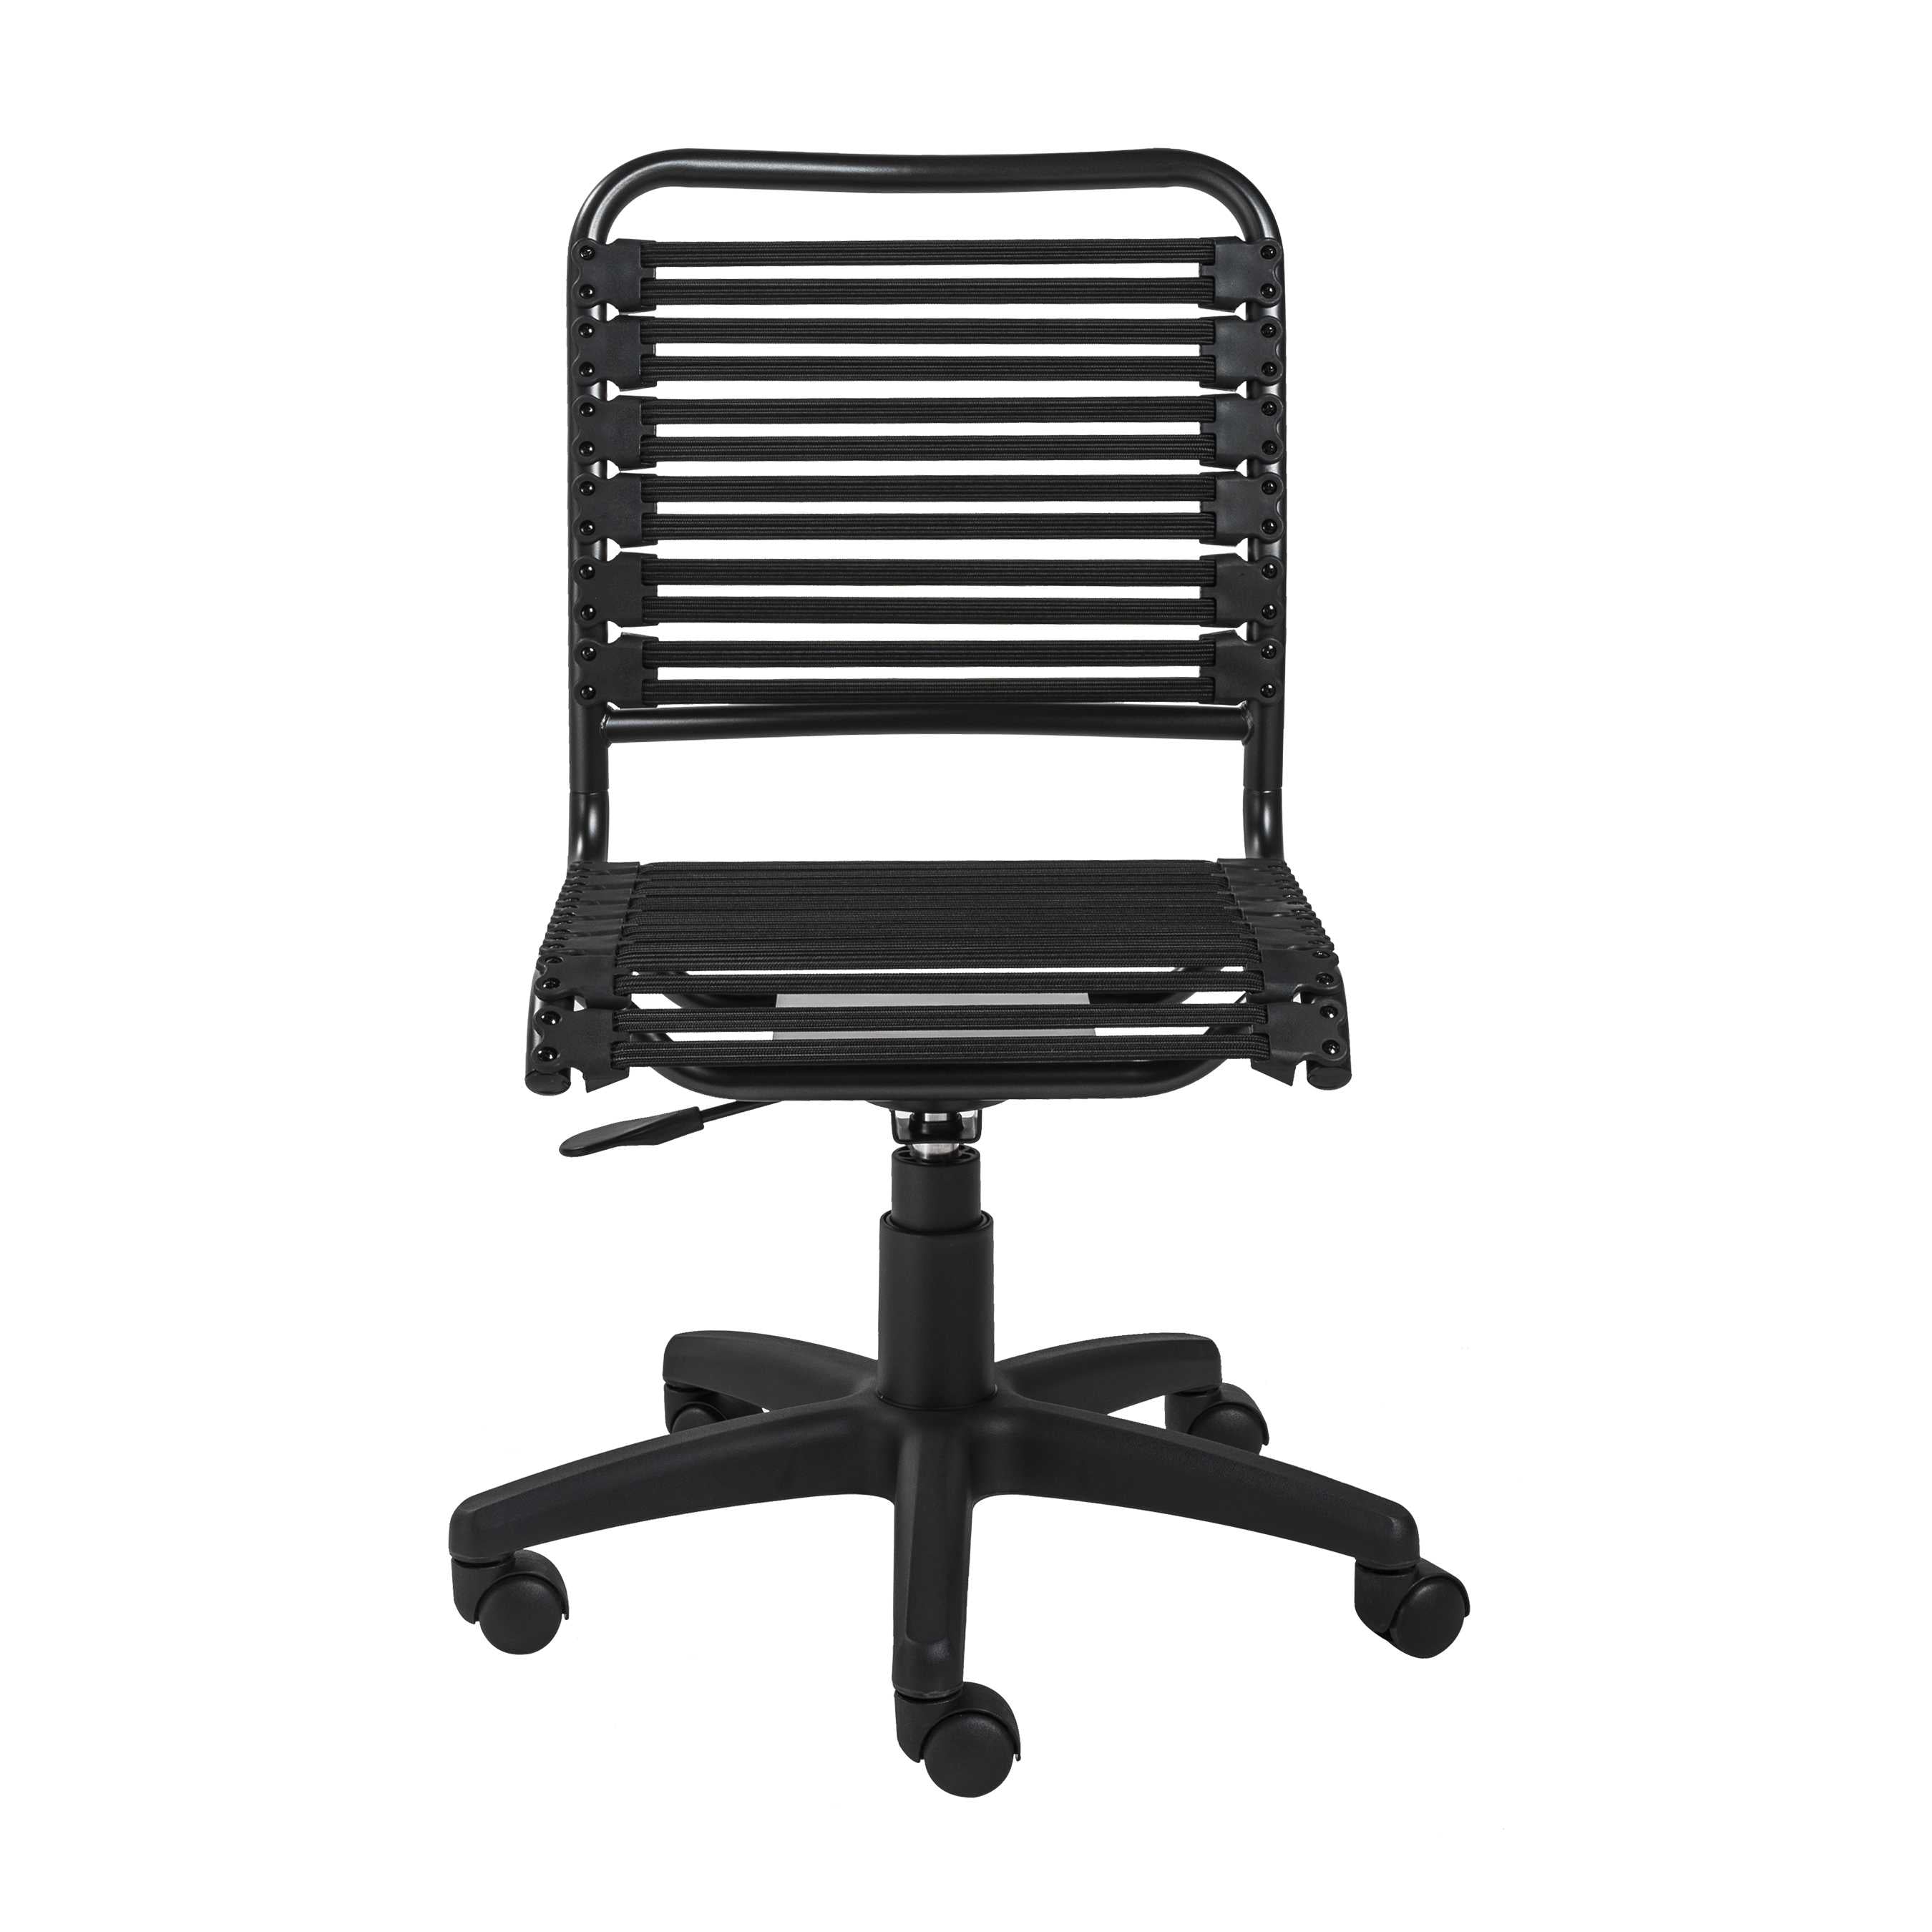 18.12" X 24" X 37.21" Black Flat Bungie Cords Low Back Office Chair with Graphite Black Frame and Base